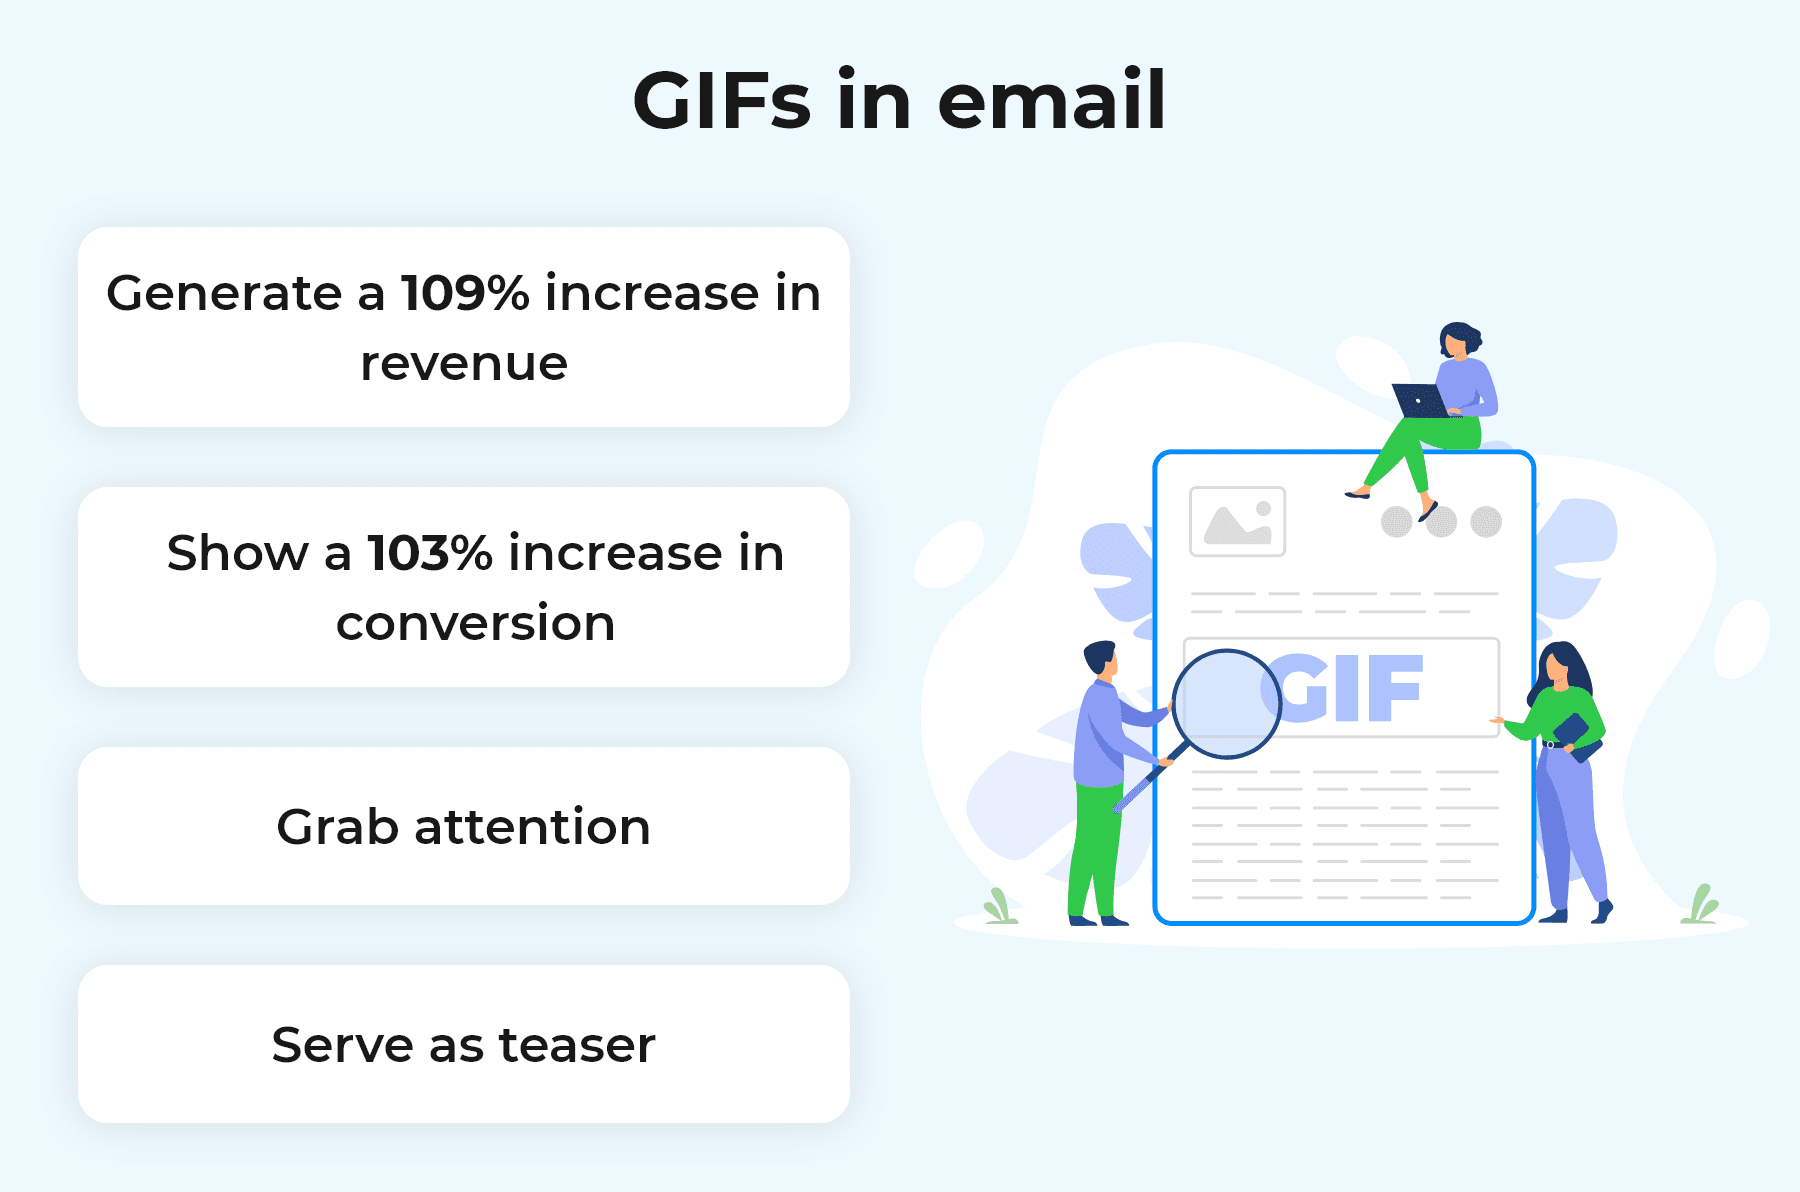 Benefits of GIFs_Email Design Trends_2022